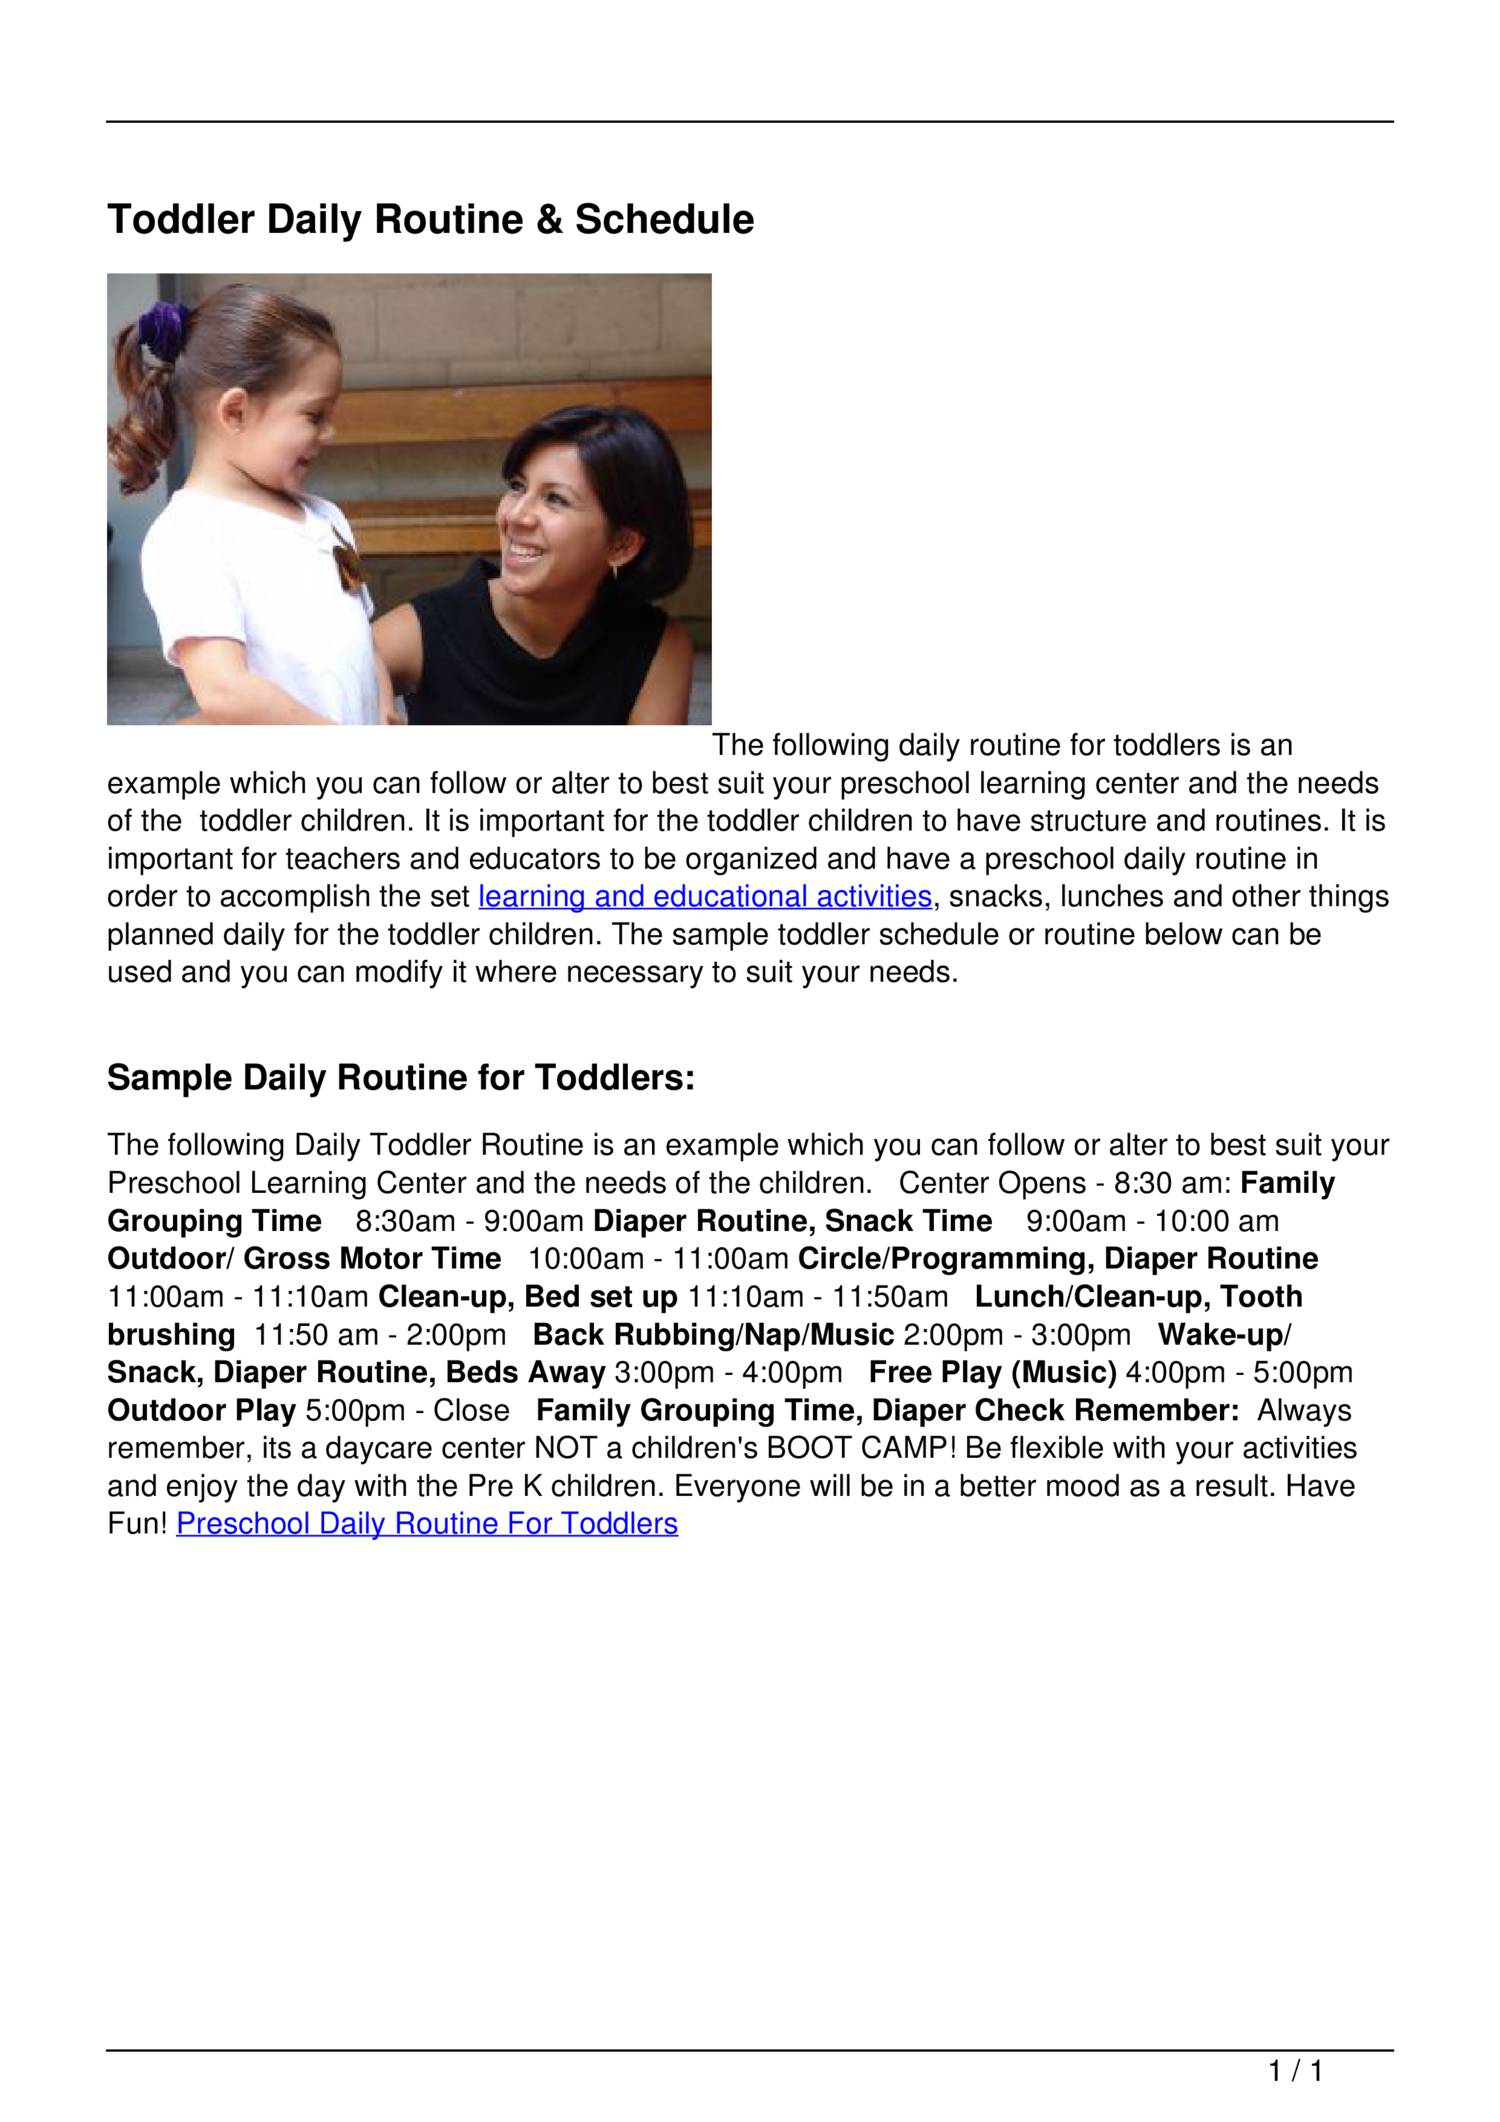 preschool-daily-routine-for-toddlers-pdf-docdroid